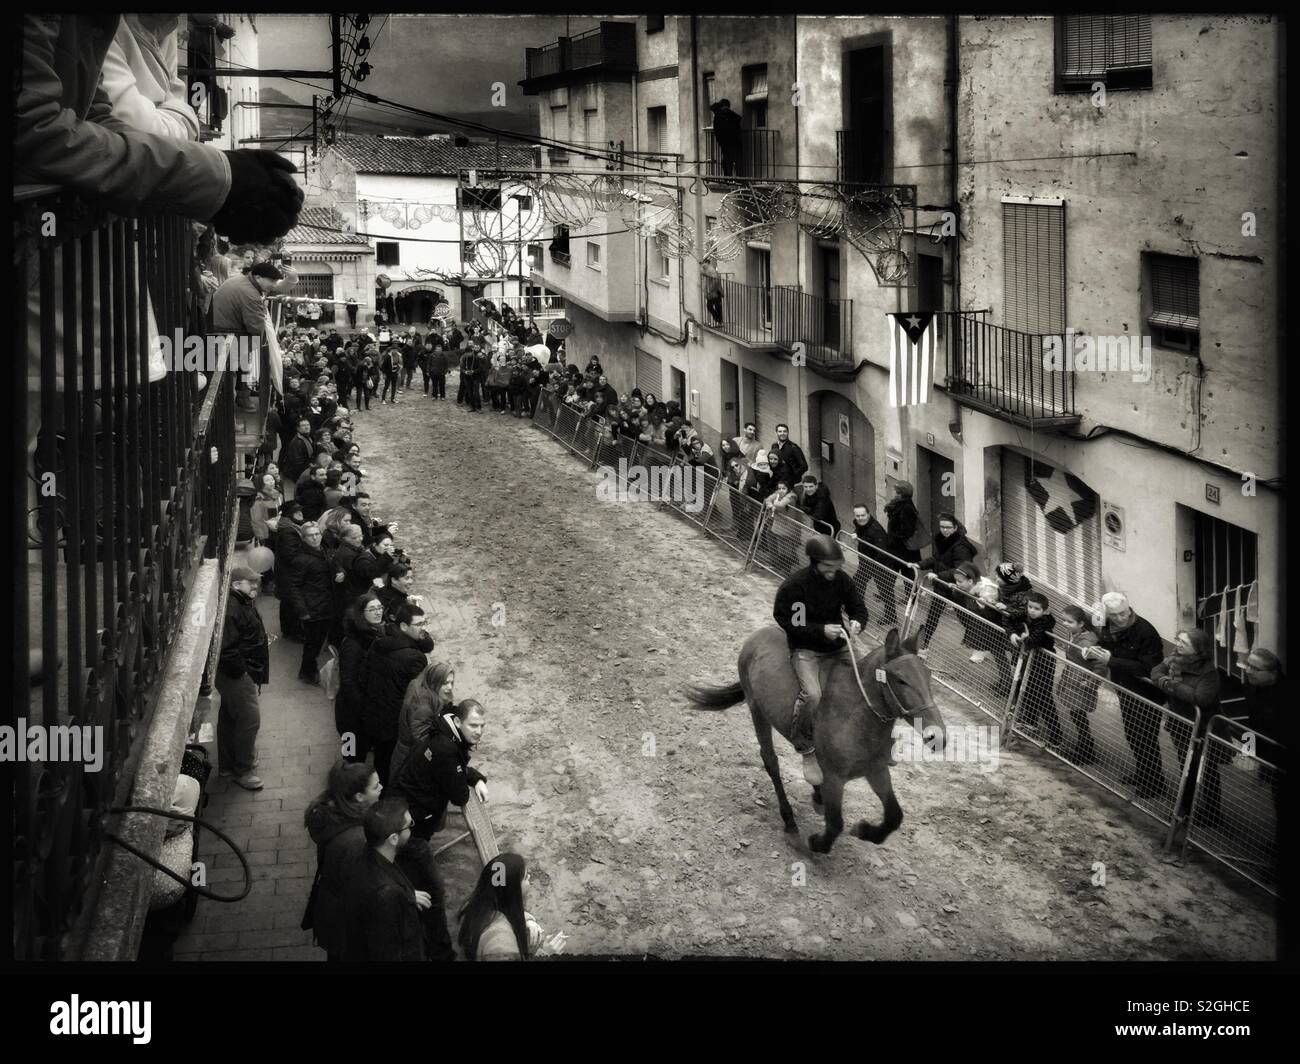 The culmination of the annual Festa de Sant Antoni d'Ascó takes place with donkey, mule and horse racing through the village, Catalonia, Spain. Stock Photo